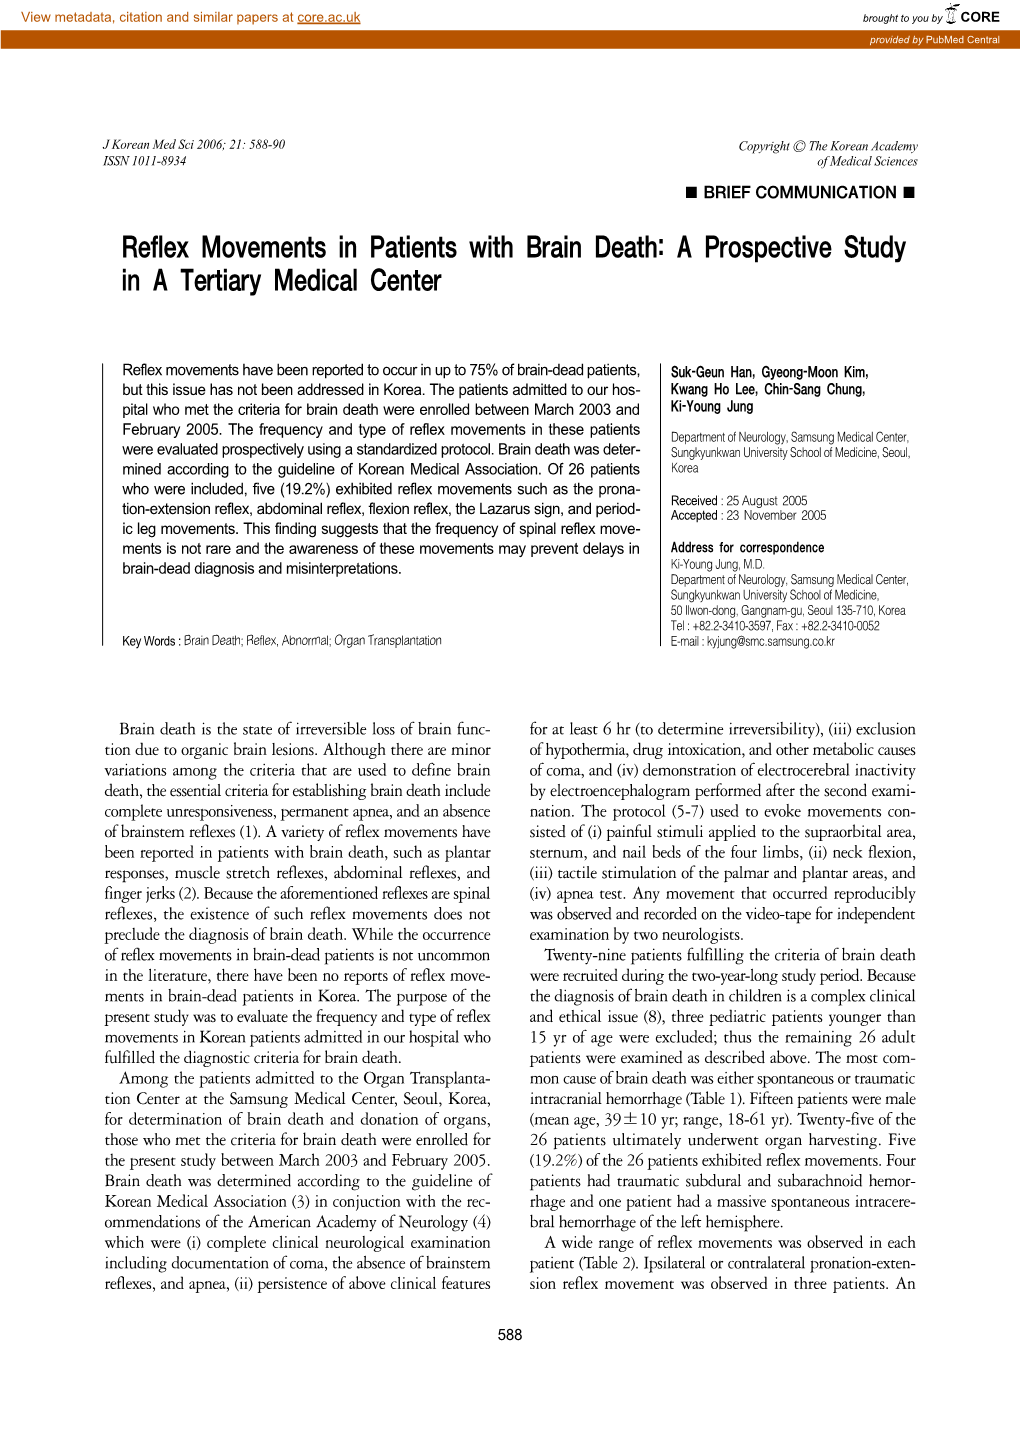 Reflex Movements in Patients with Brain Death: a Prospective Study in a Tertiary Medical Center